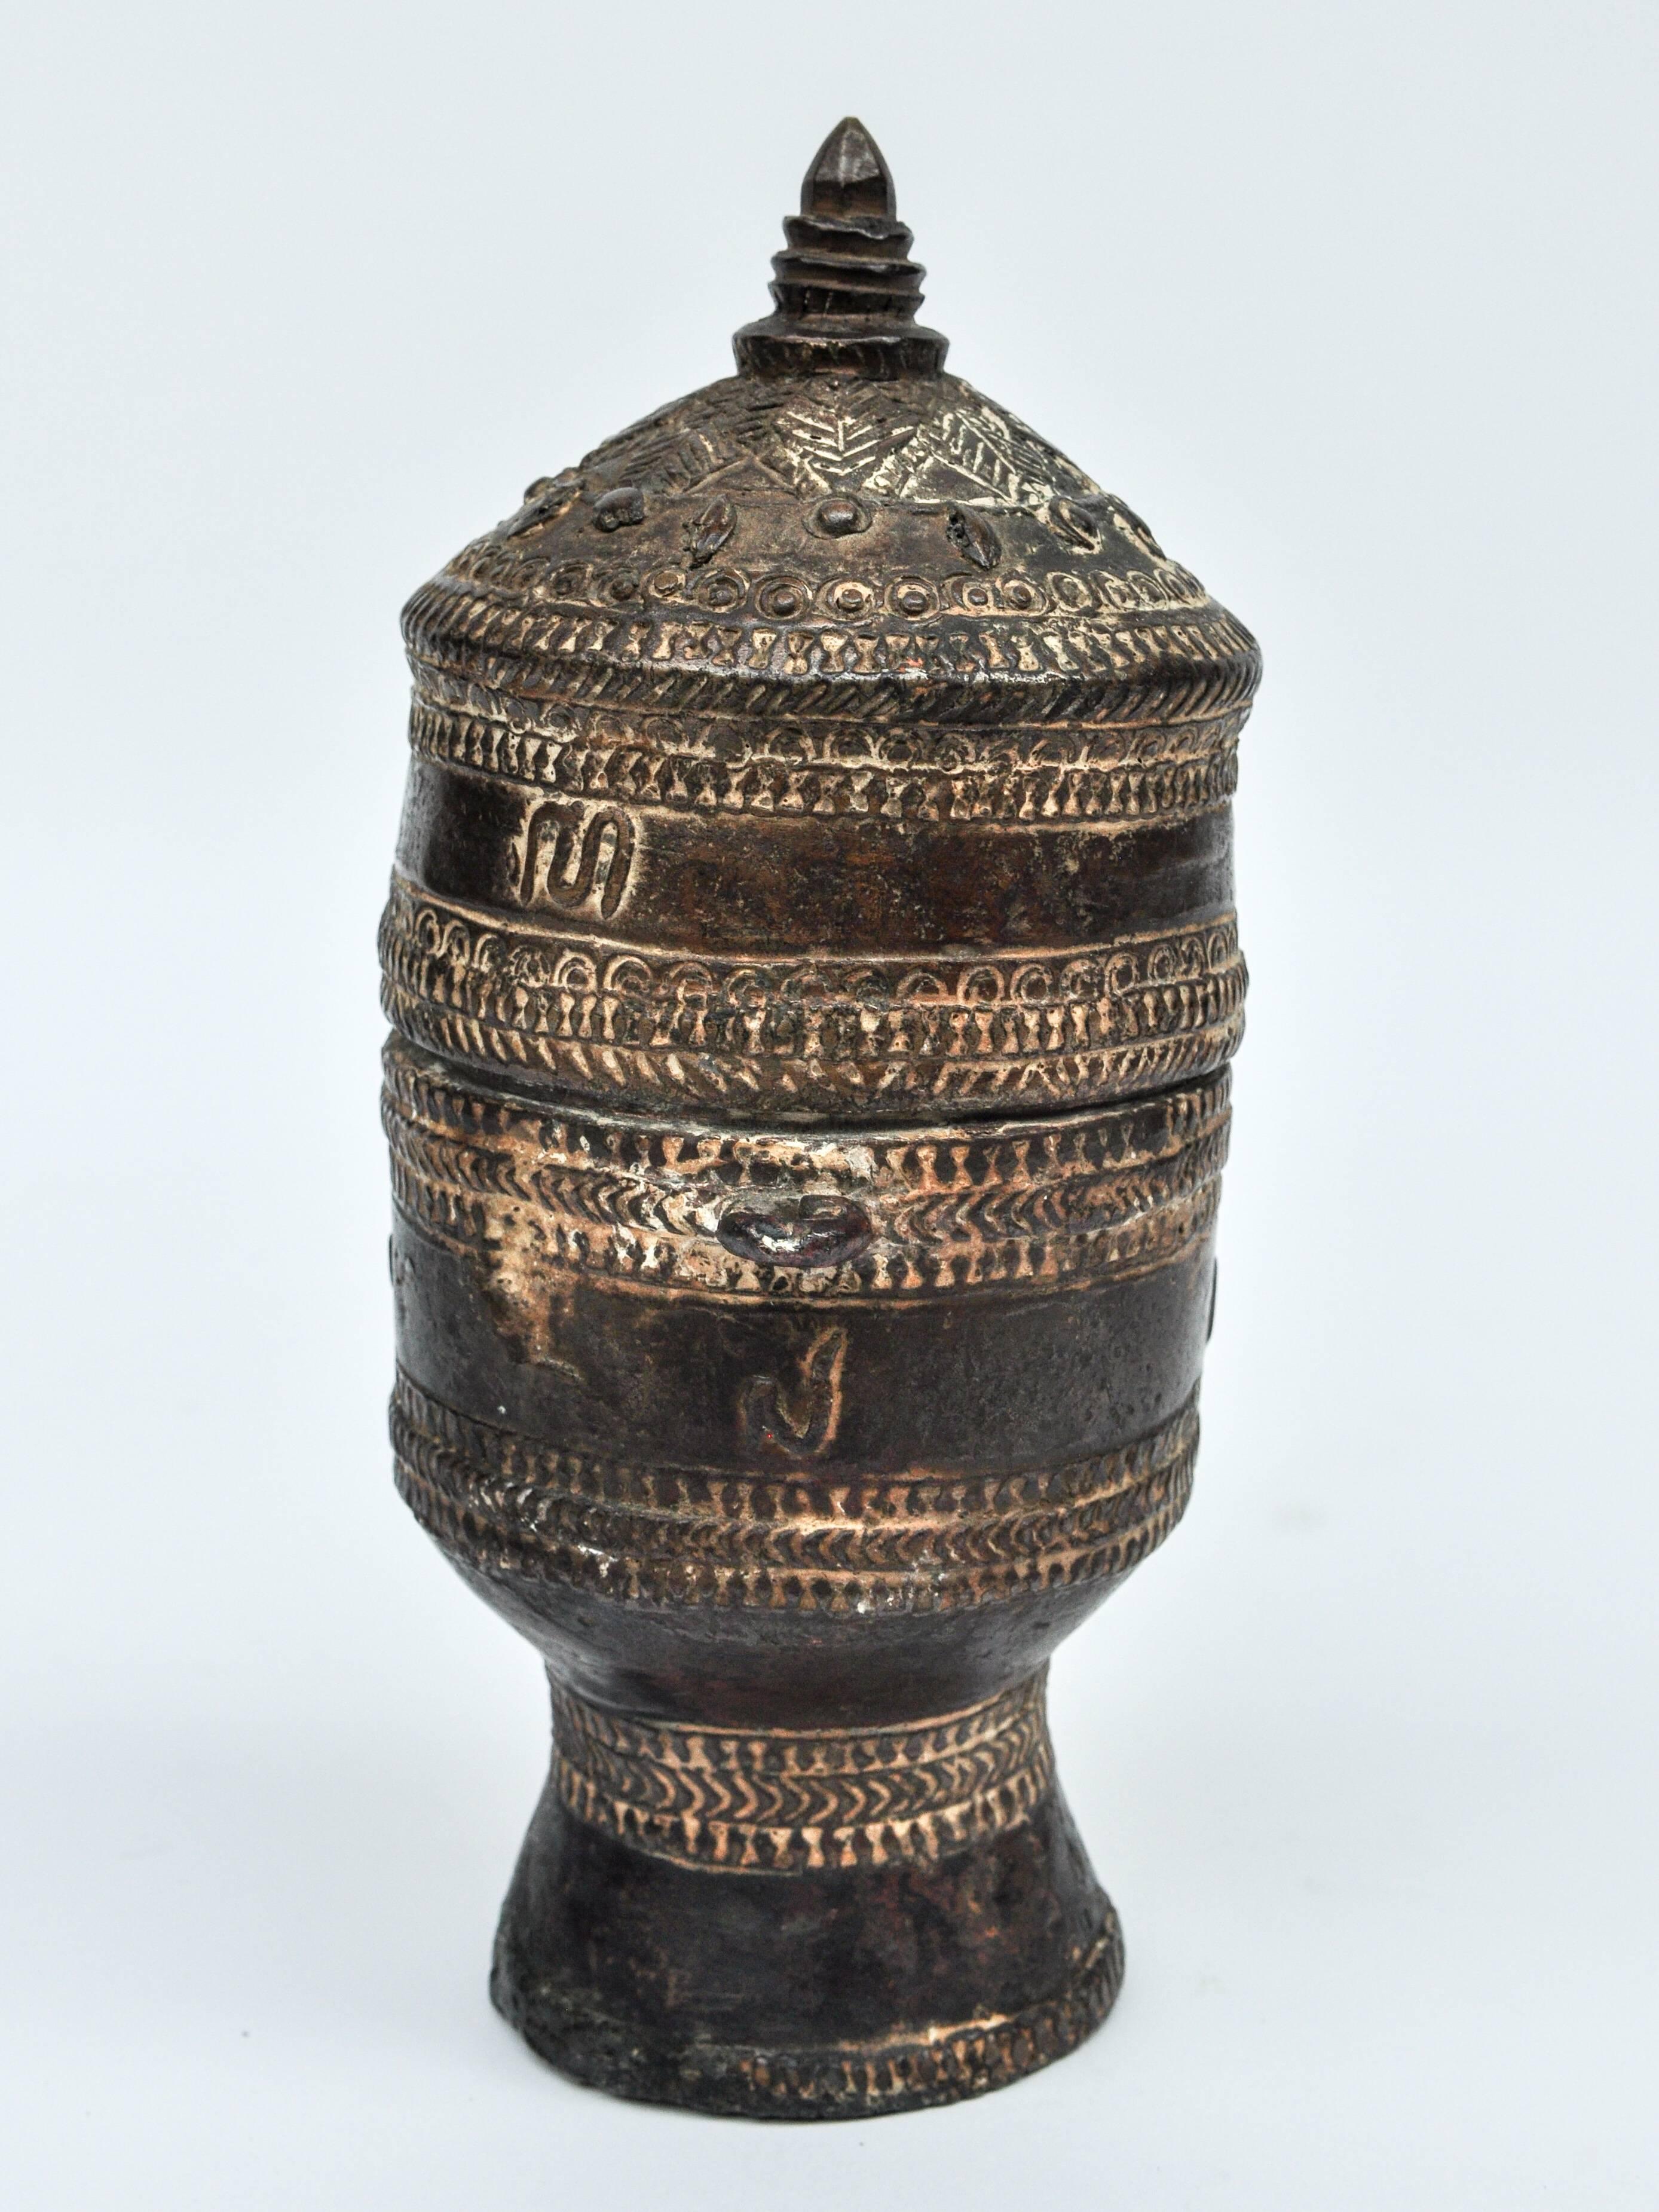 Hand-Crafted Bronze Lime Container from Laos, Mid-20th Century